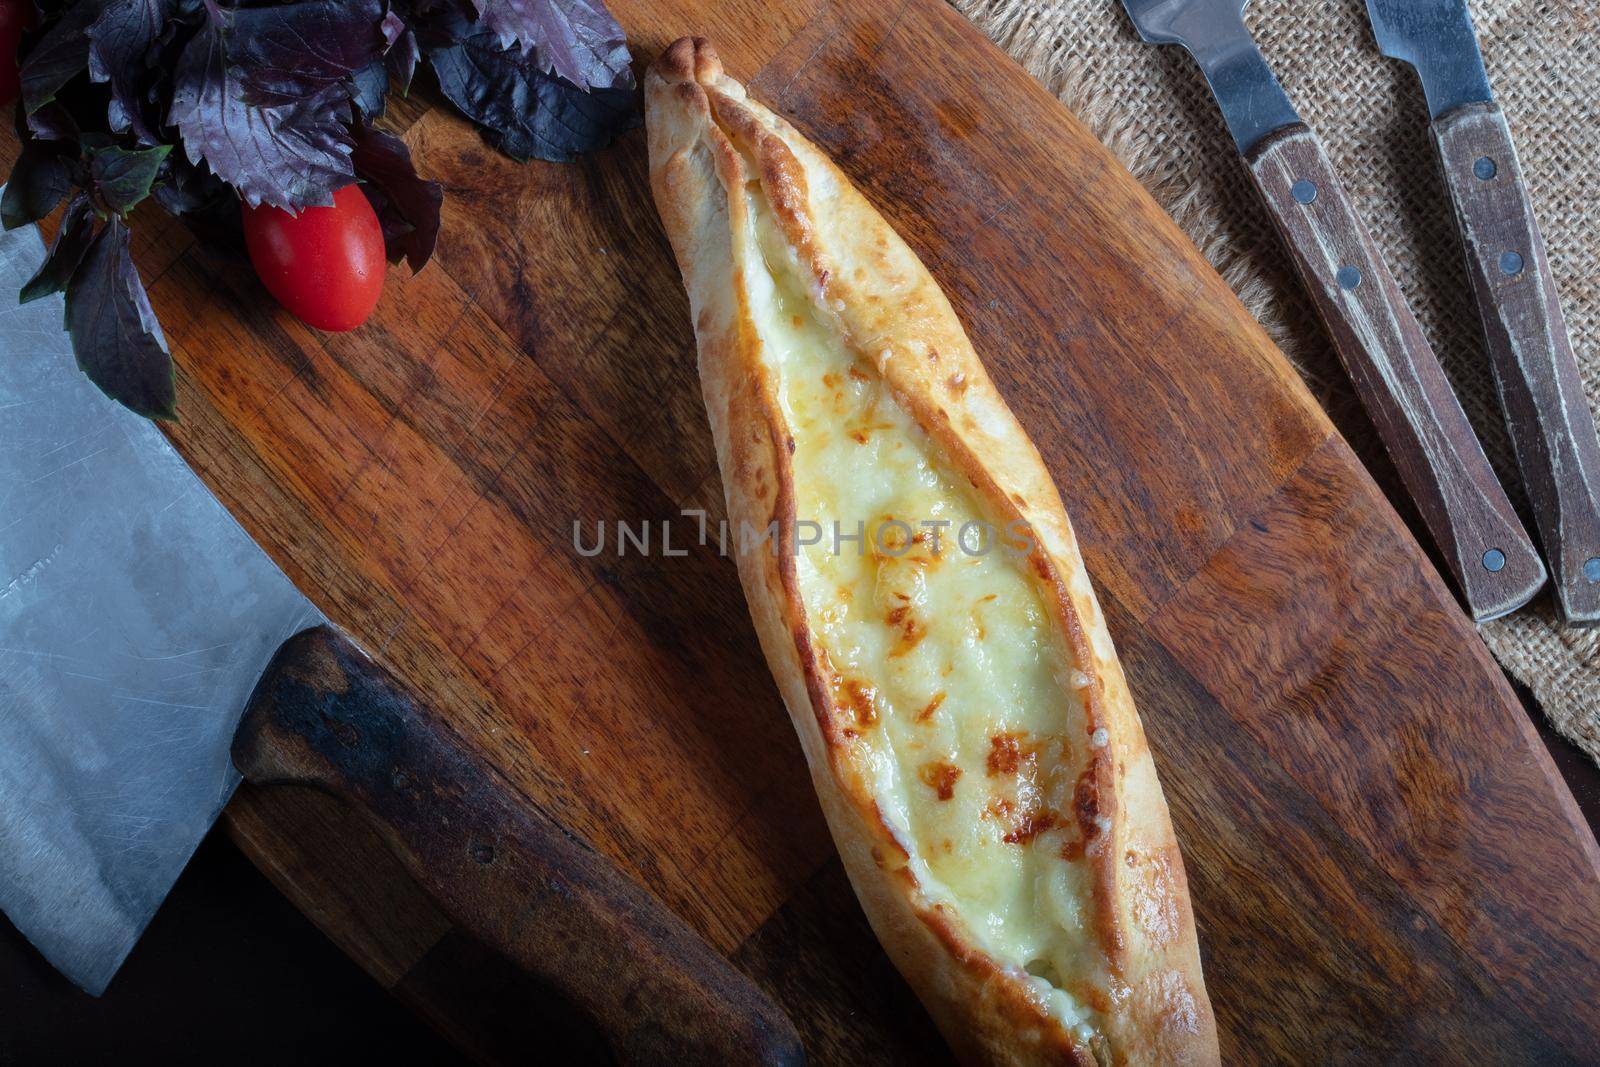 Turkish pide with cheese - Kasarli pide. High quality photo